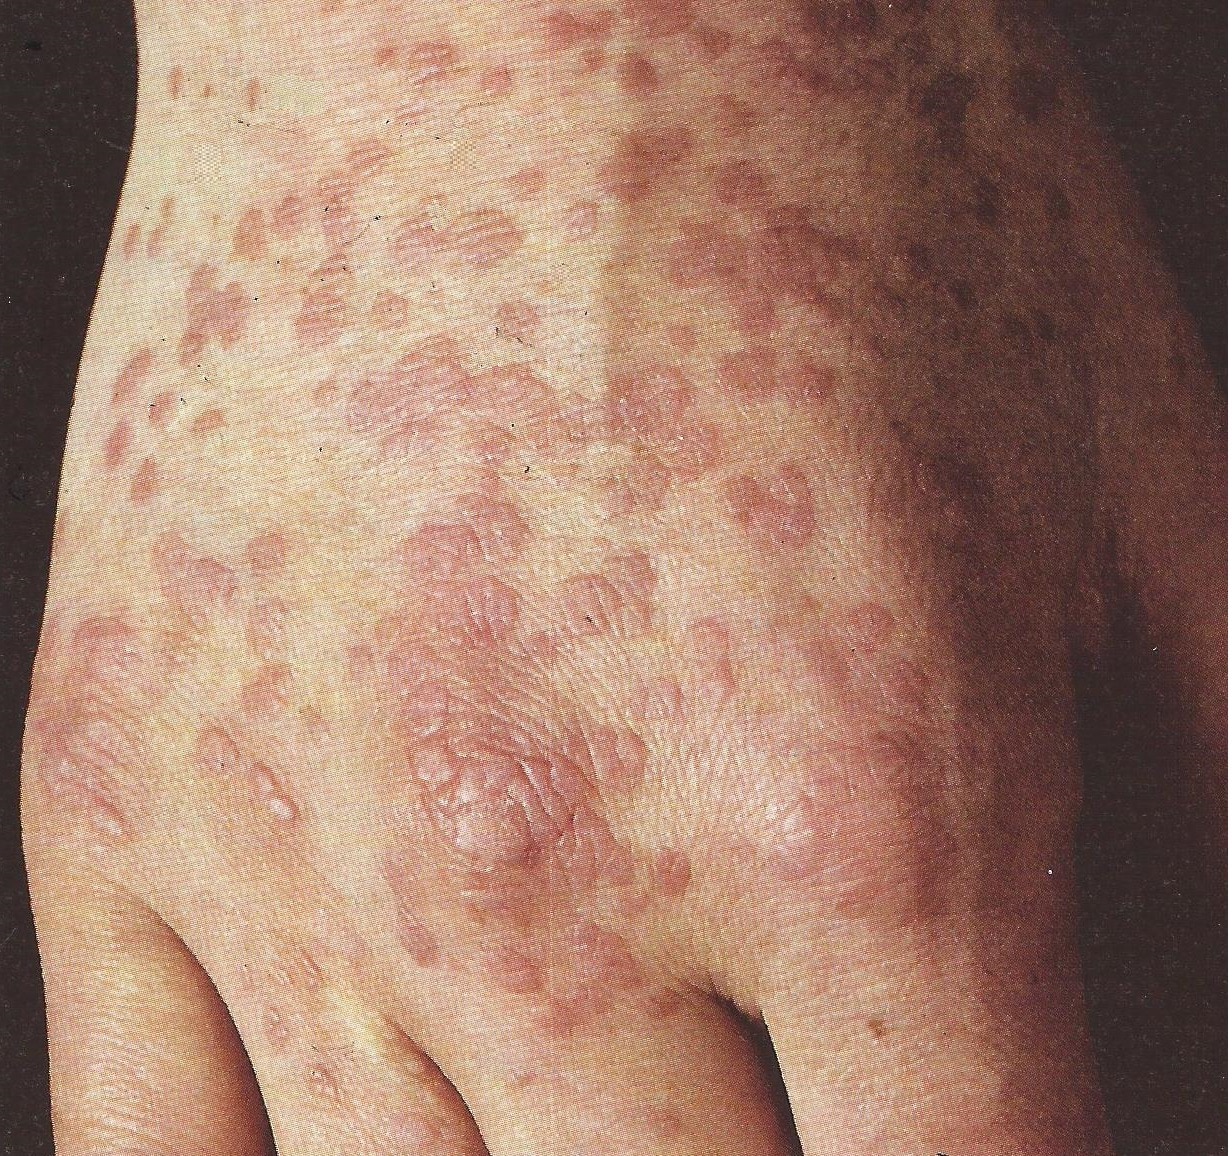 warts on hands meaning analize pt anemie